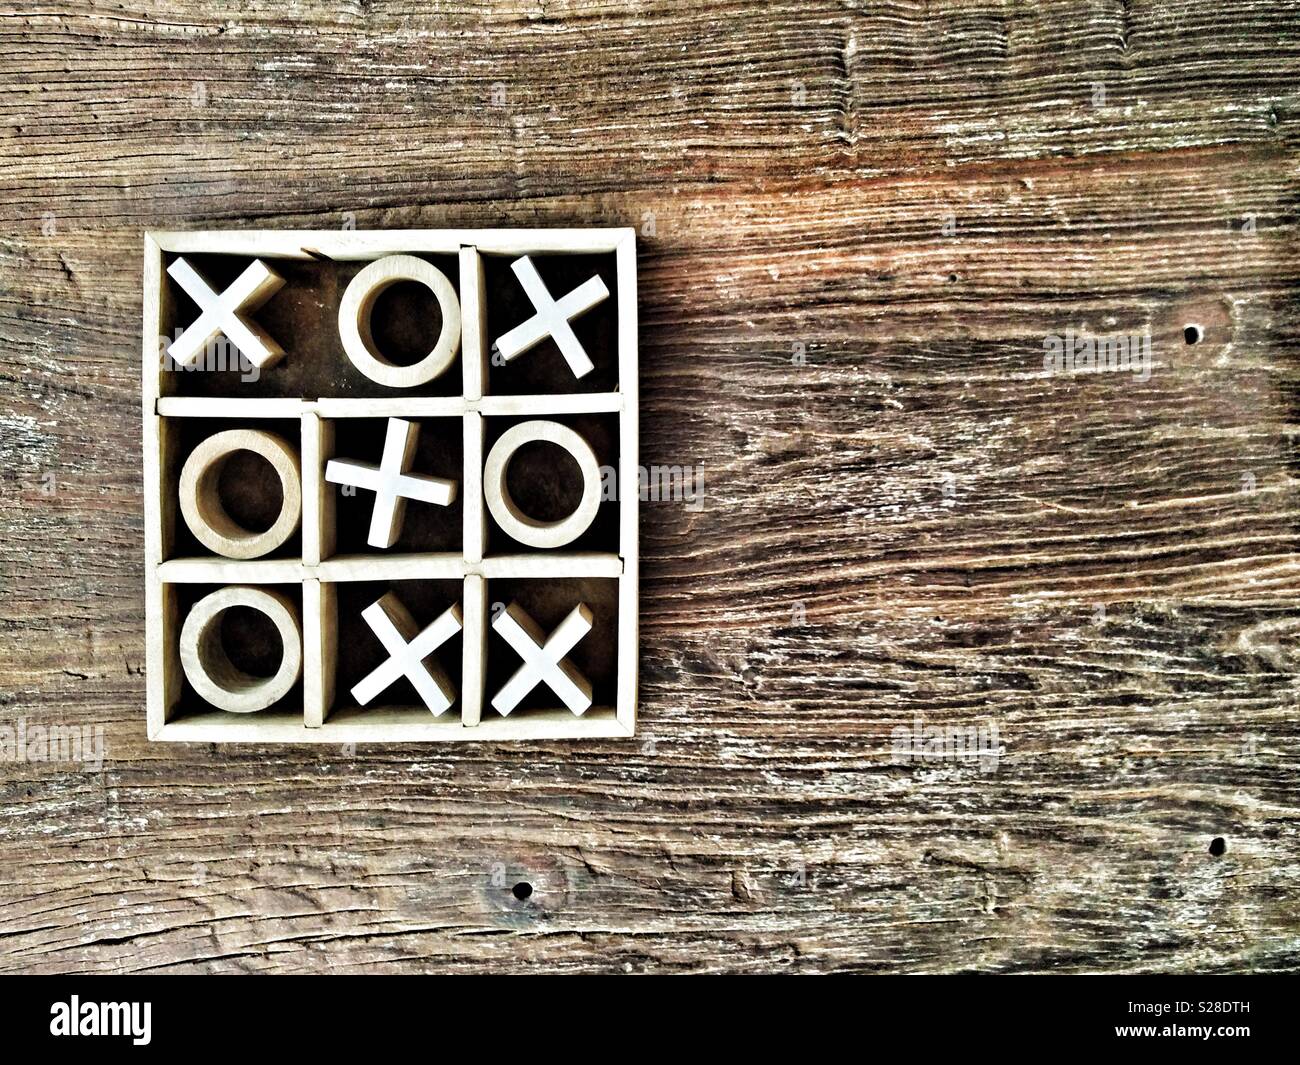 Wooden tic-tac-toe or noughts and crosses game on a grainy tabletop with copy space. Crosses win. Stock Photo